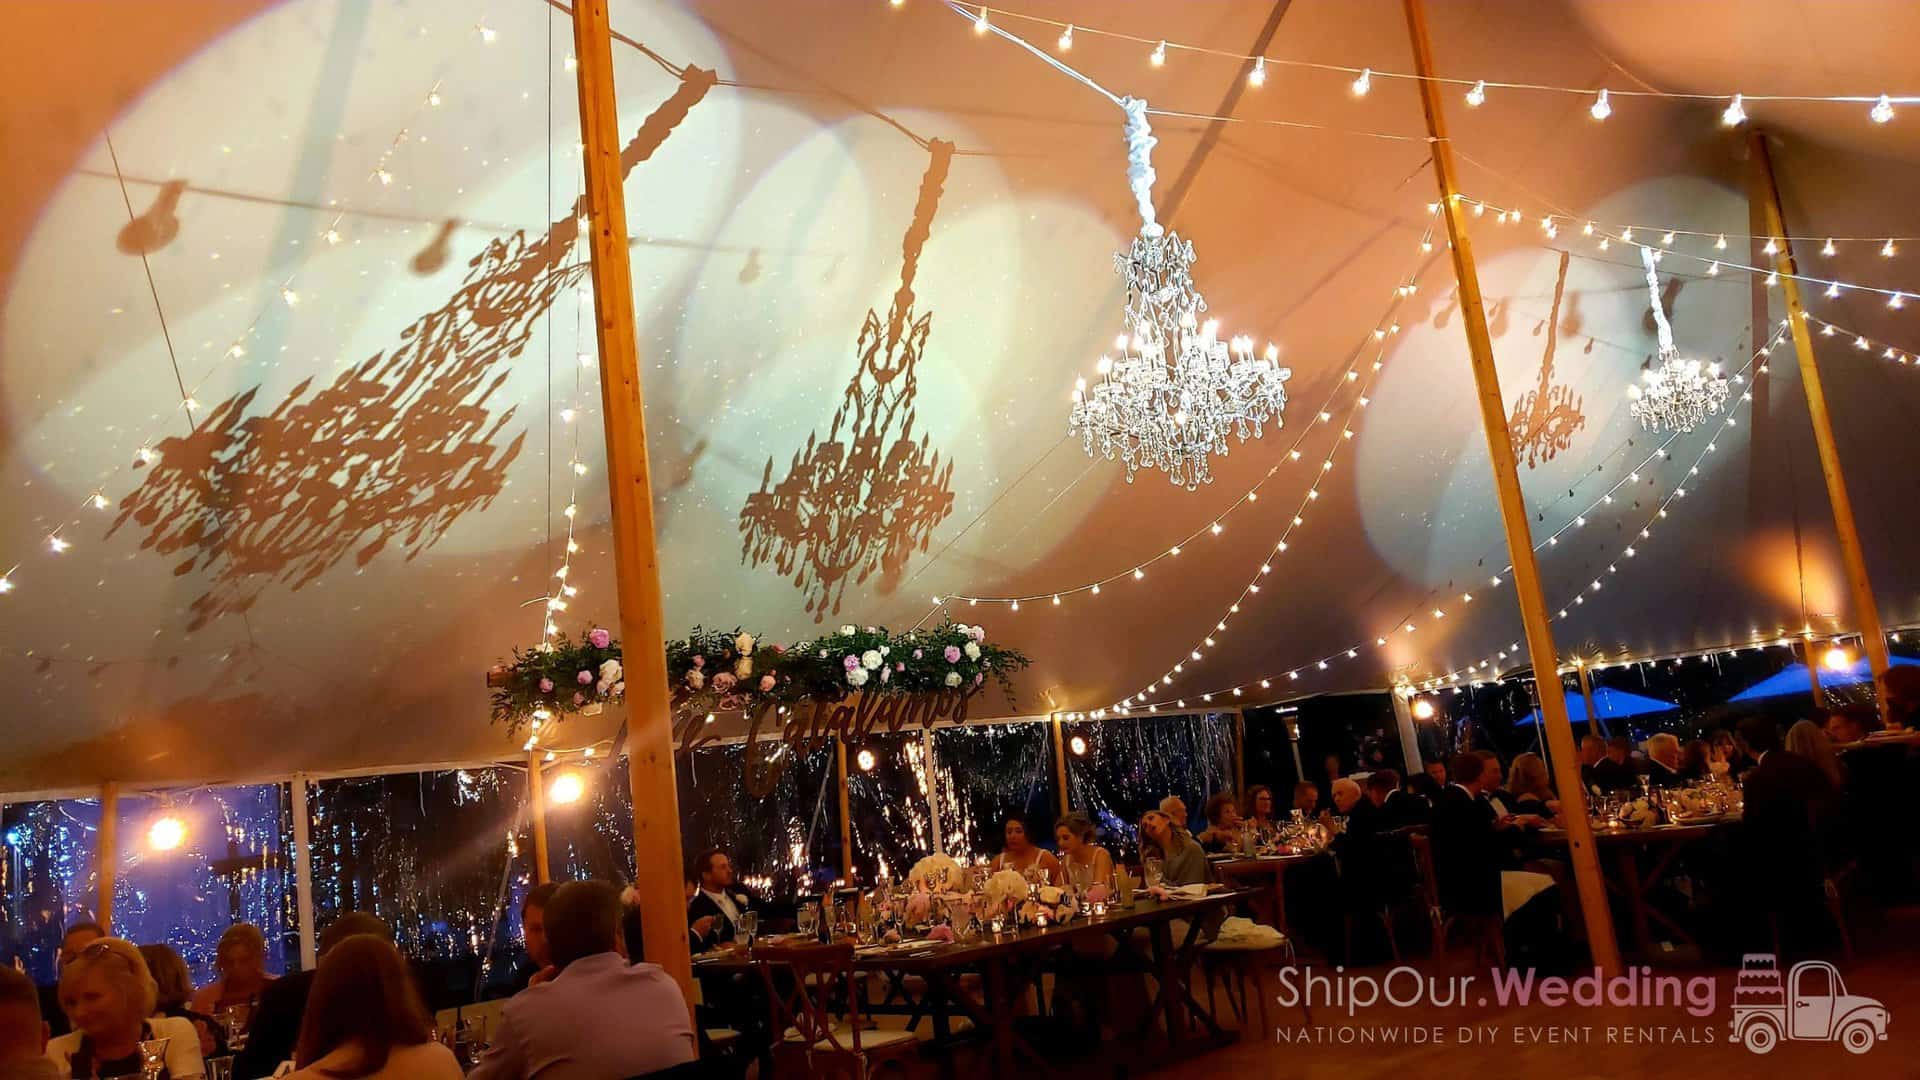 https://shipour.wedding/wp-content/uploads/2019/03/tent_wedding_with_patio_string_lights-scaled.jpg